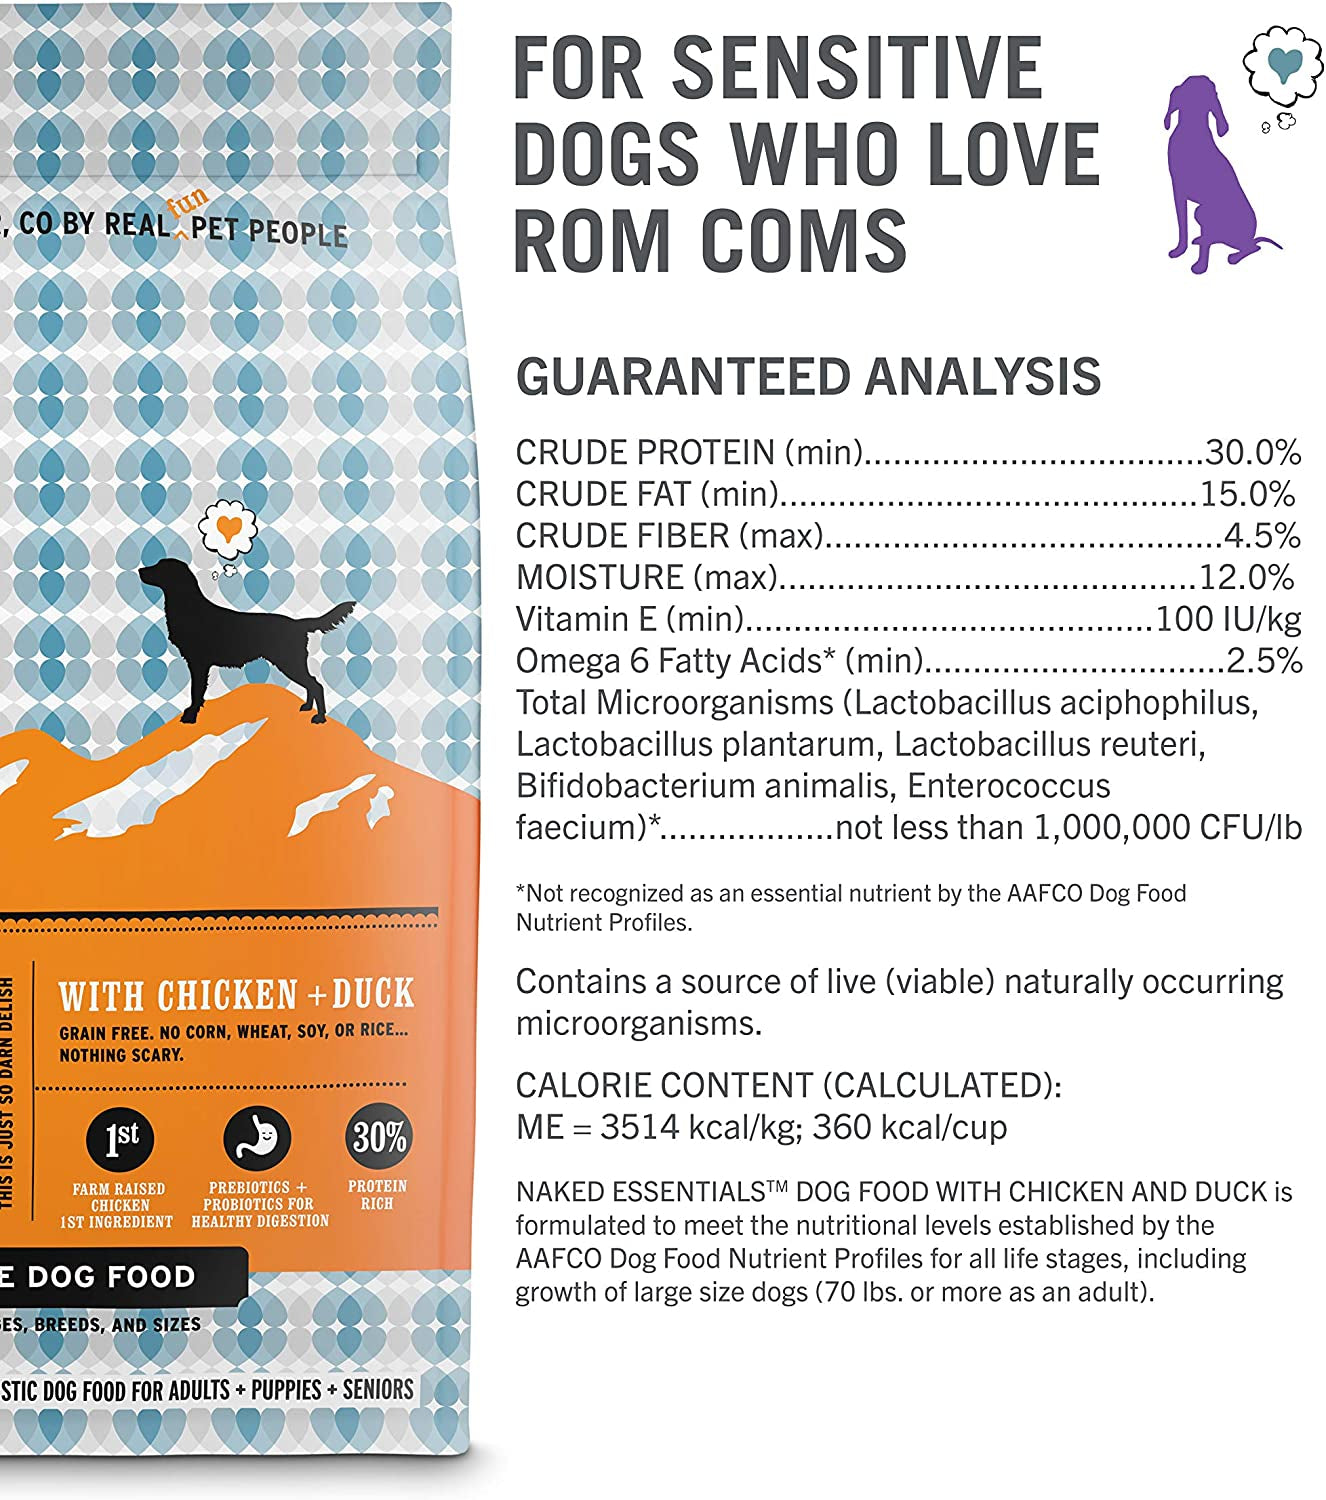 "I and Love and You" Naked Essentials Dry Dog Food - Natural Grain Free Kibble for Large and Small Dogs with Prebiotics & Probiotics (Variety of Flavors)